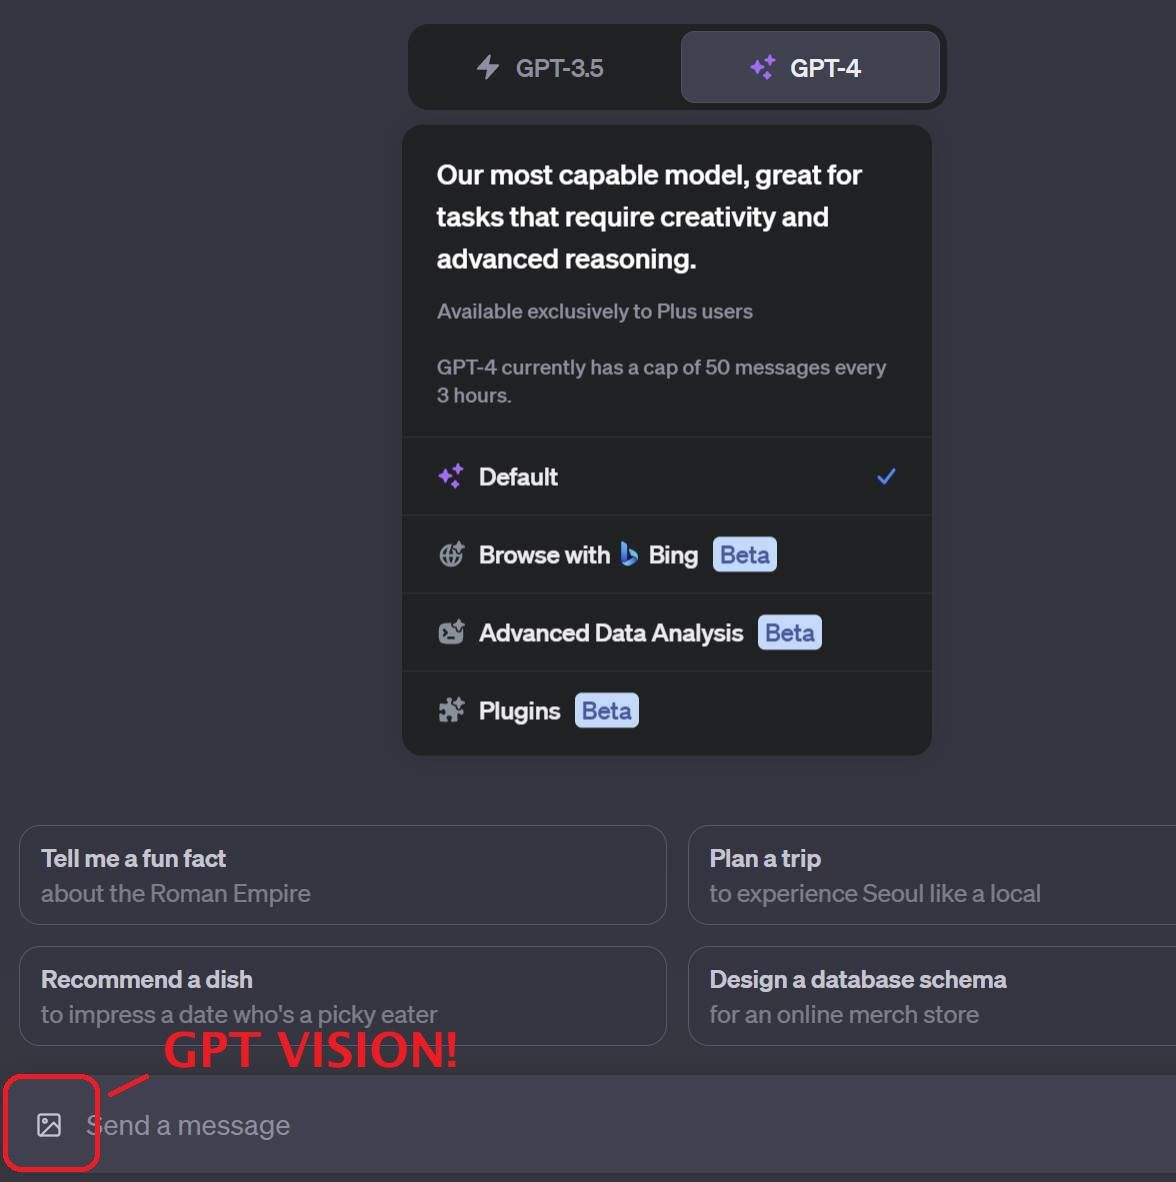 A screenshot of ChatGPT showing the image icon for GPT Vision boxed in red.